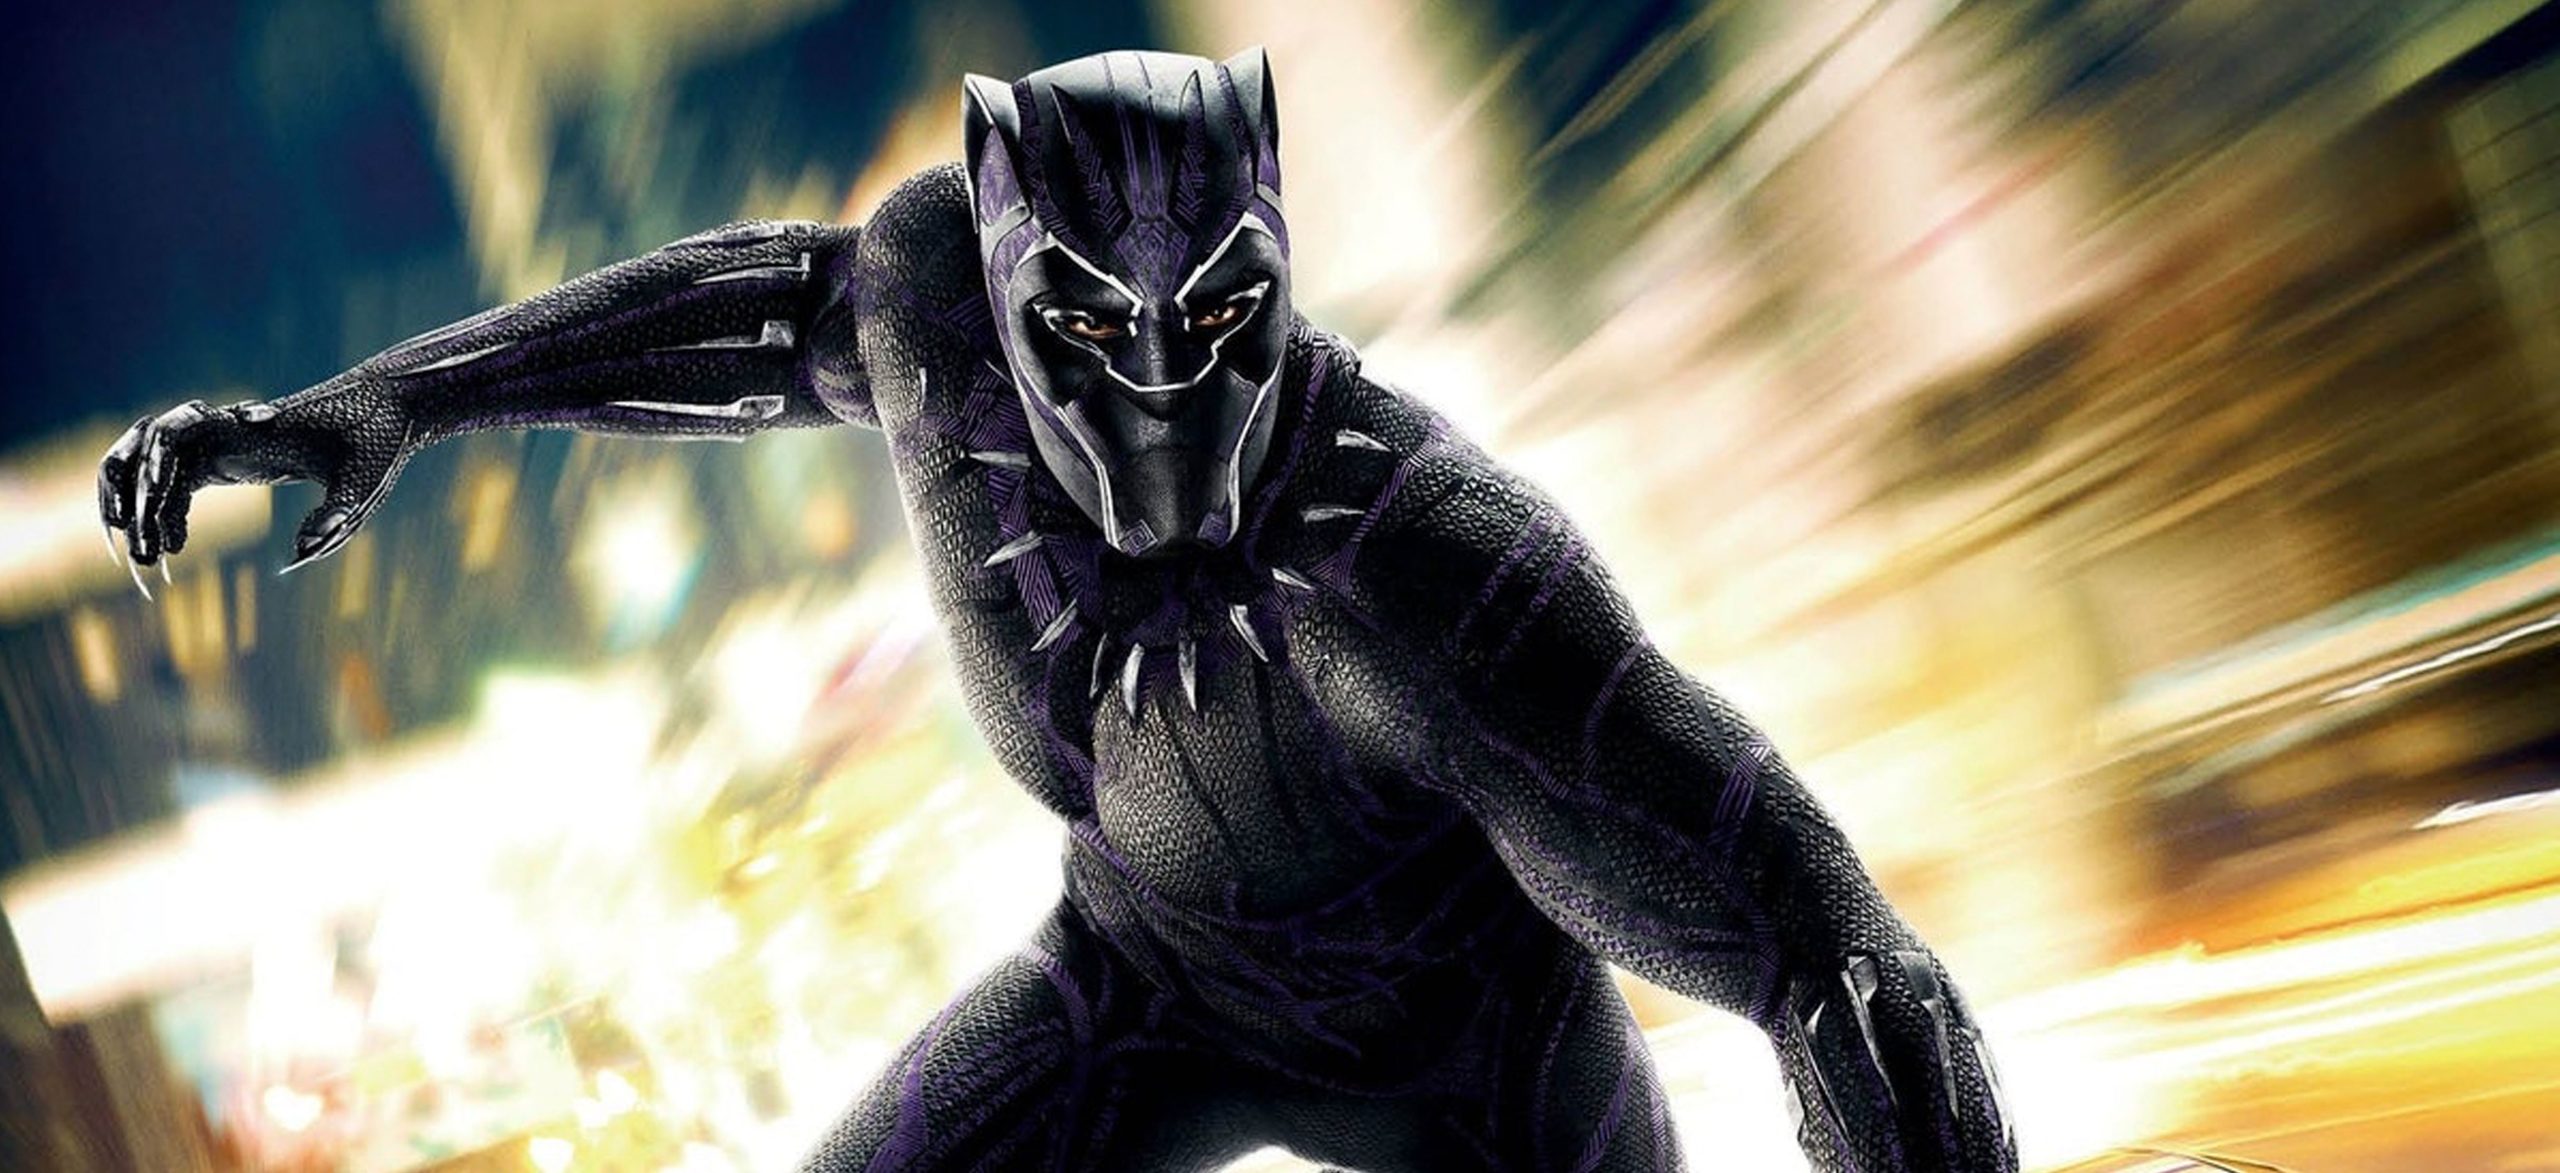 Background image for Movies On The Lawn: Black Panther